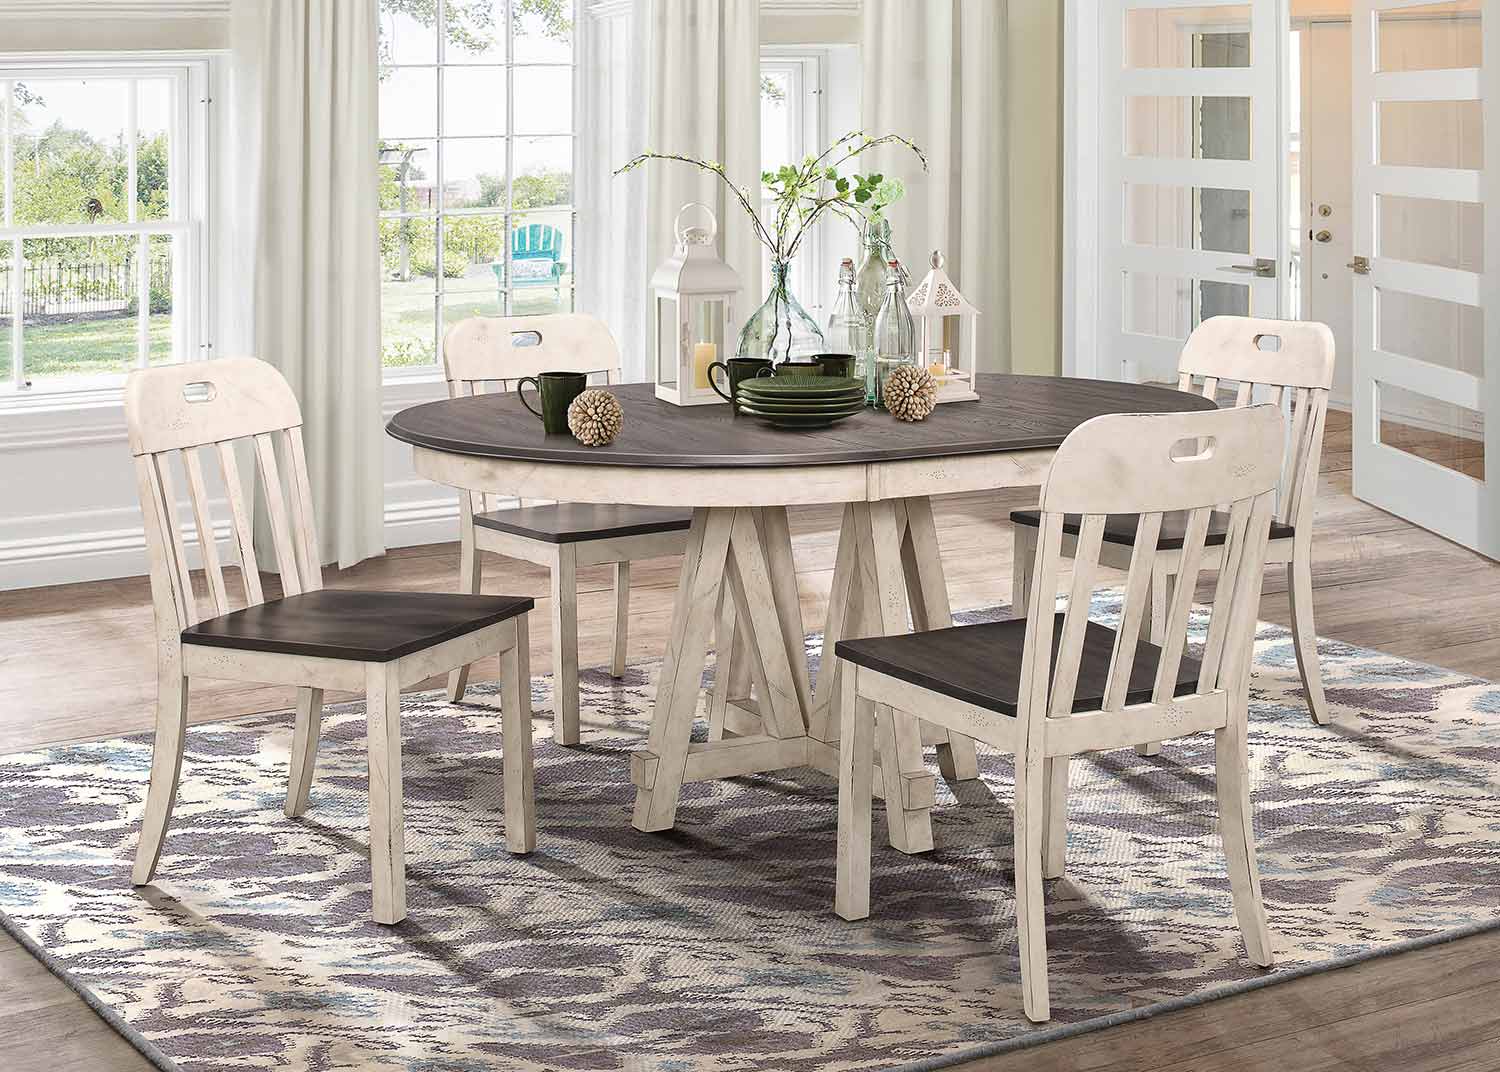 Homelegance Clover Round/Oval Dining Set - Rustic Gray